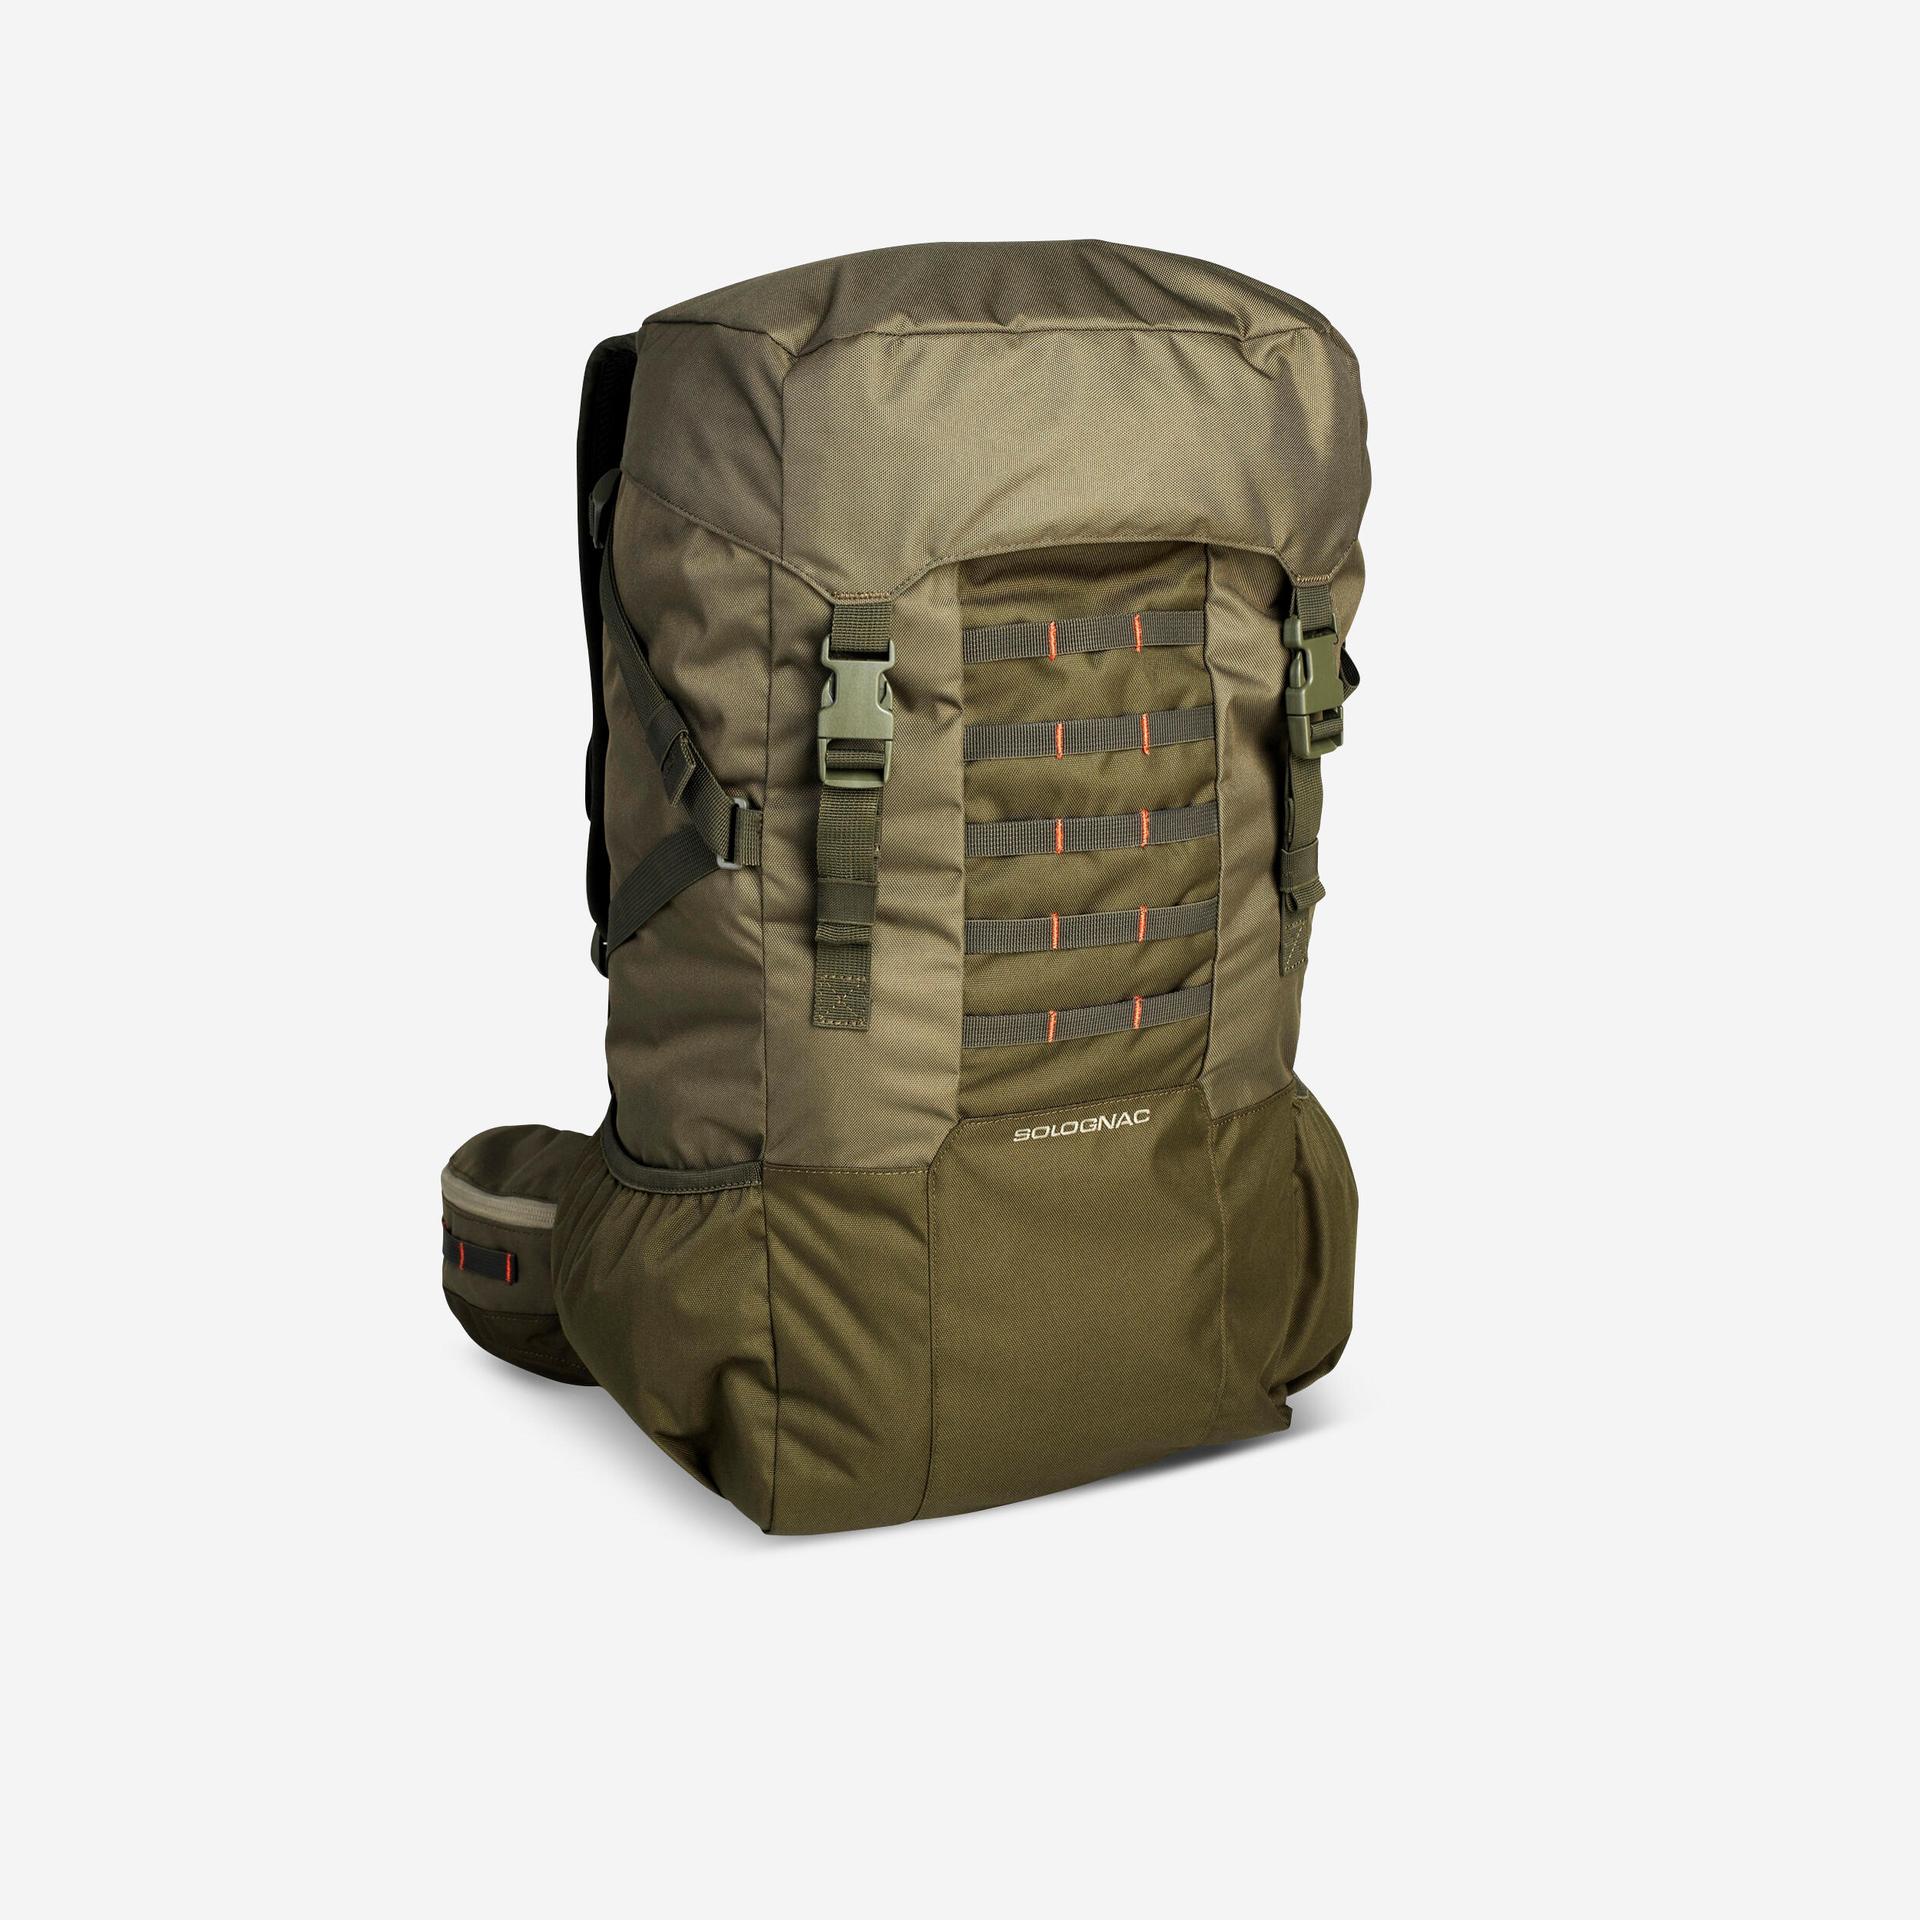 wildlife x-access 50l backpack - green